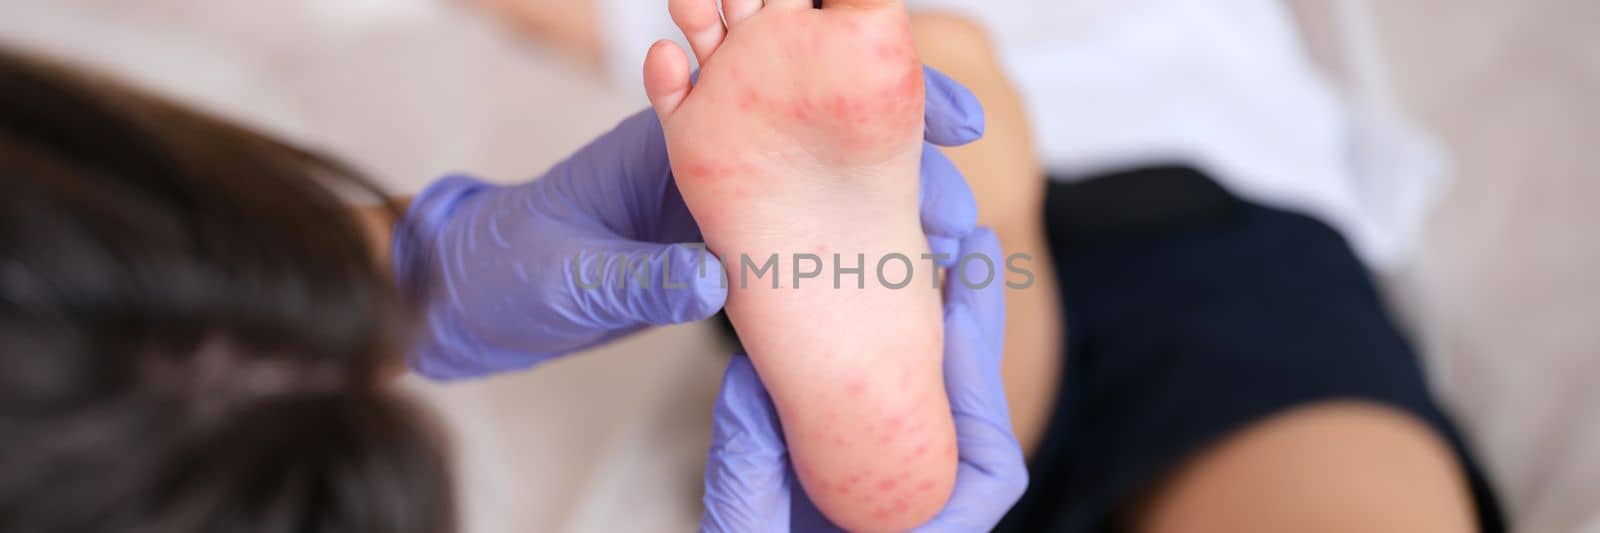 Doctor examines red rashes on feet of child closeup by kuprevich